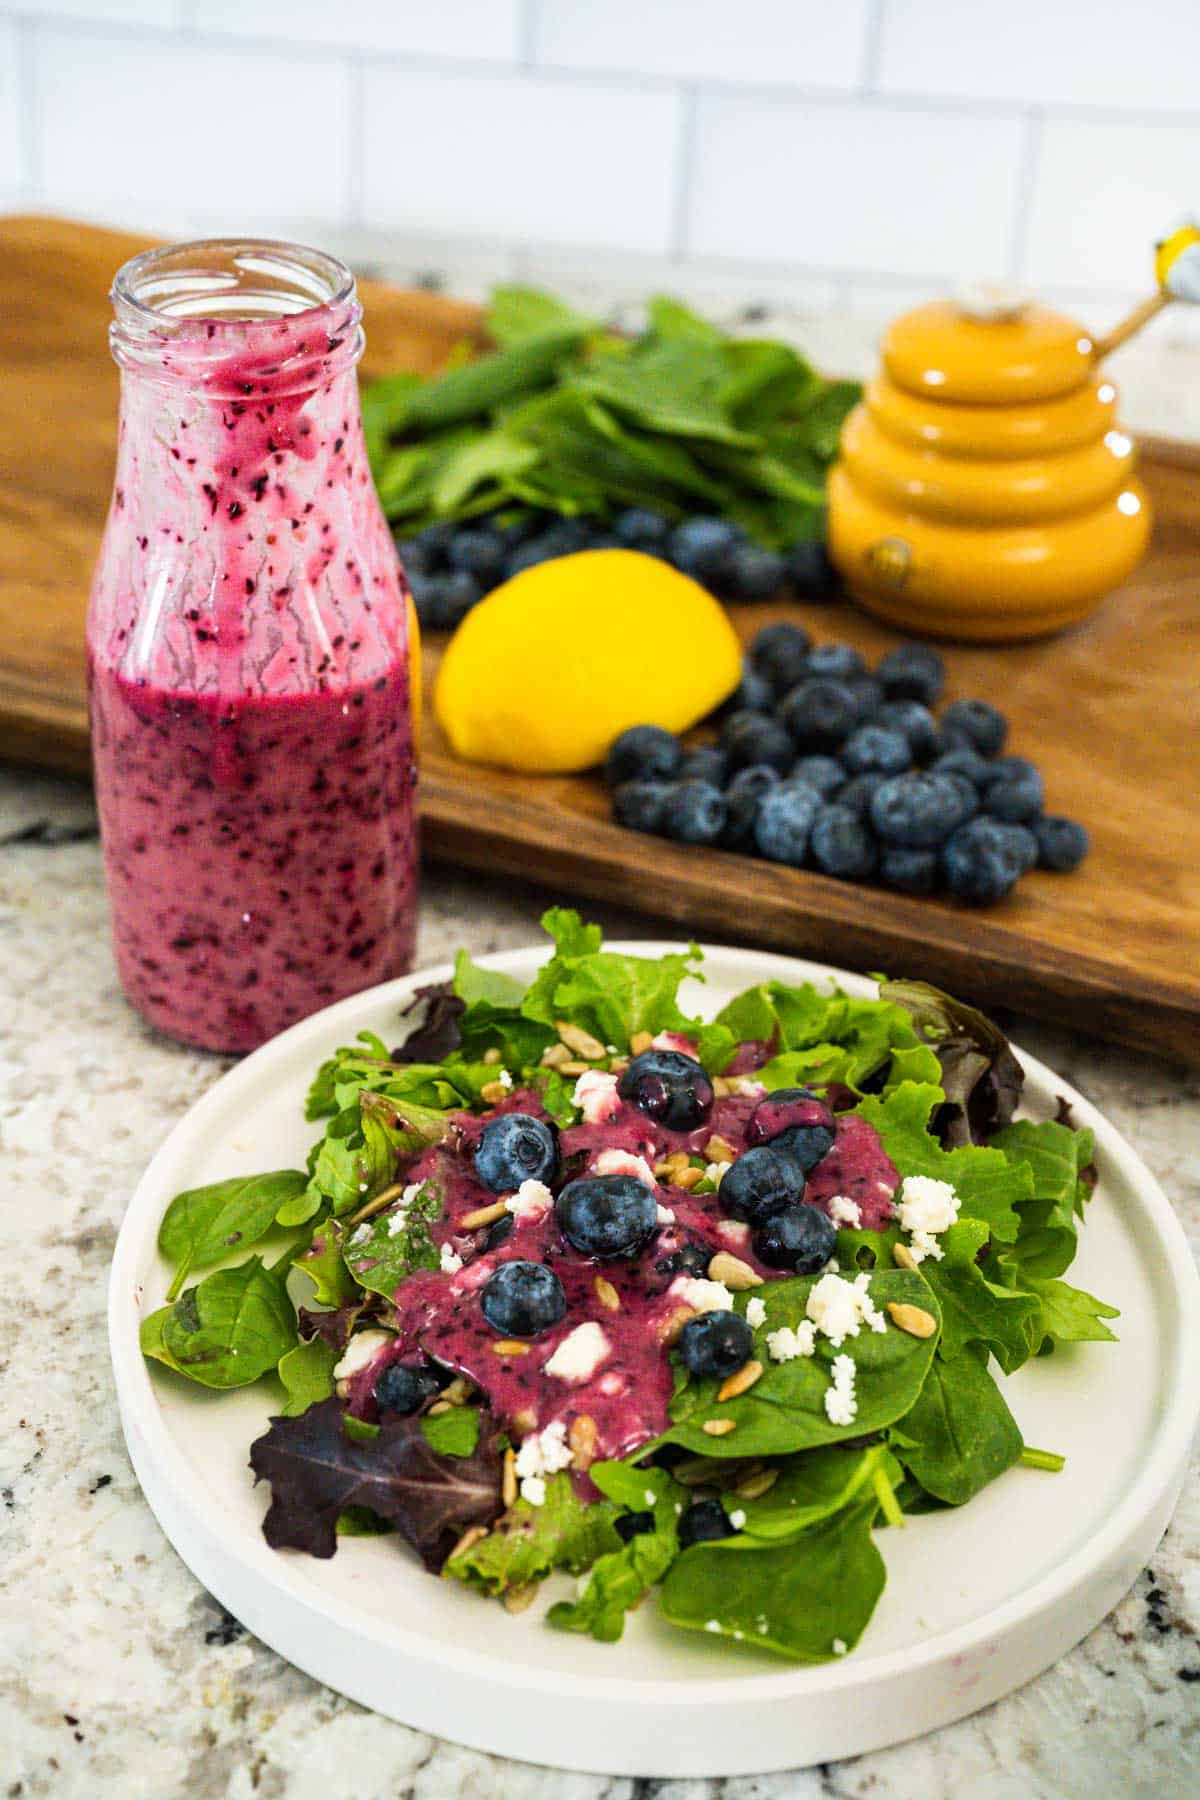 A spring blend of salad on a white plate with feta, blueberries and nuts topped with blueberry vinaigrette dressing. A bottle of the dressing and a wooden tray filled with blueberries, lemon, greens, and honey in the background.